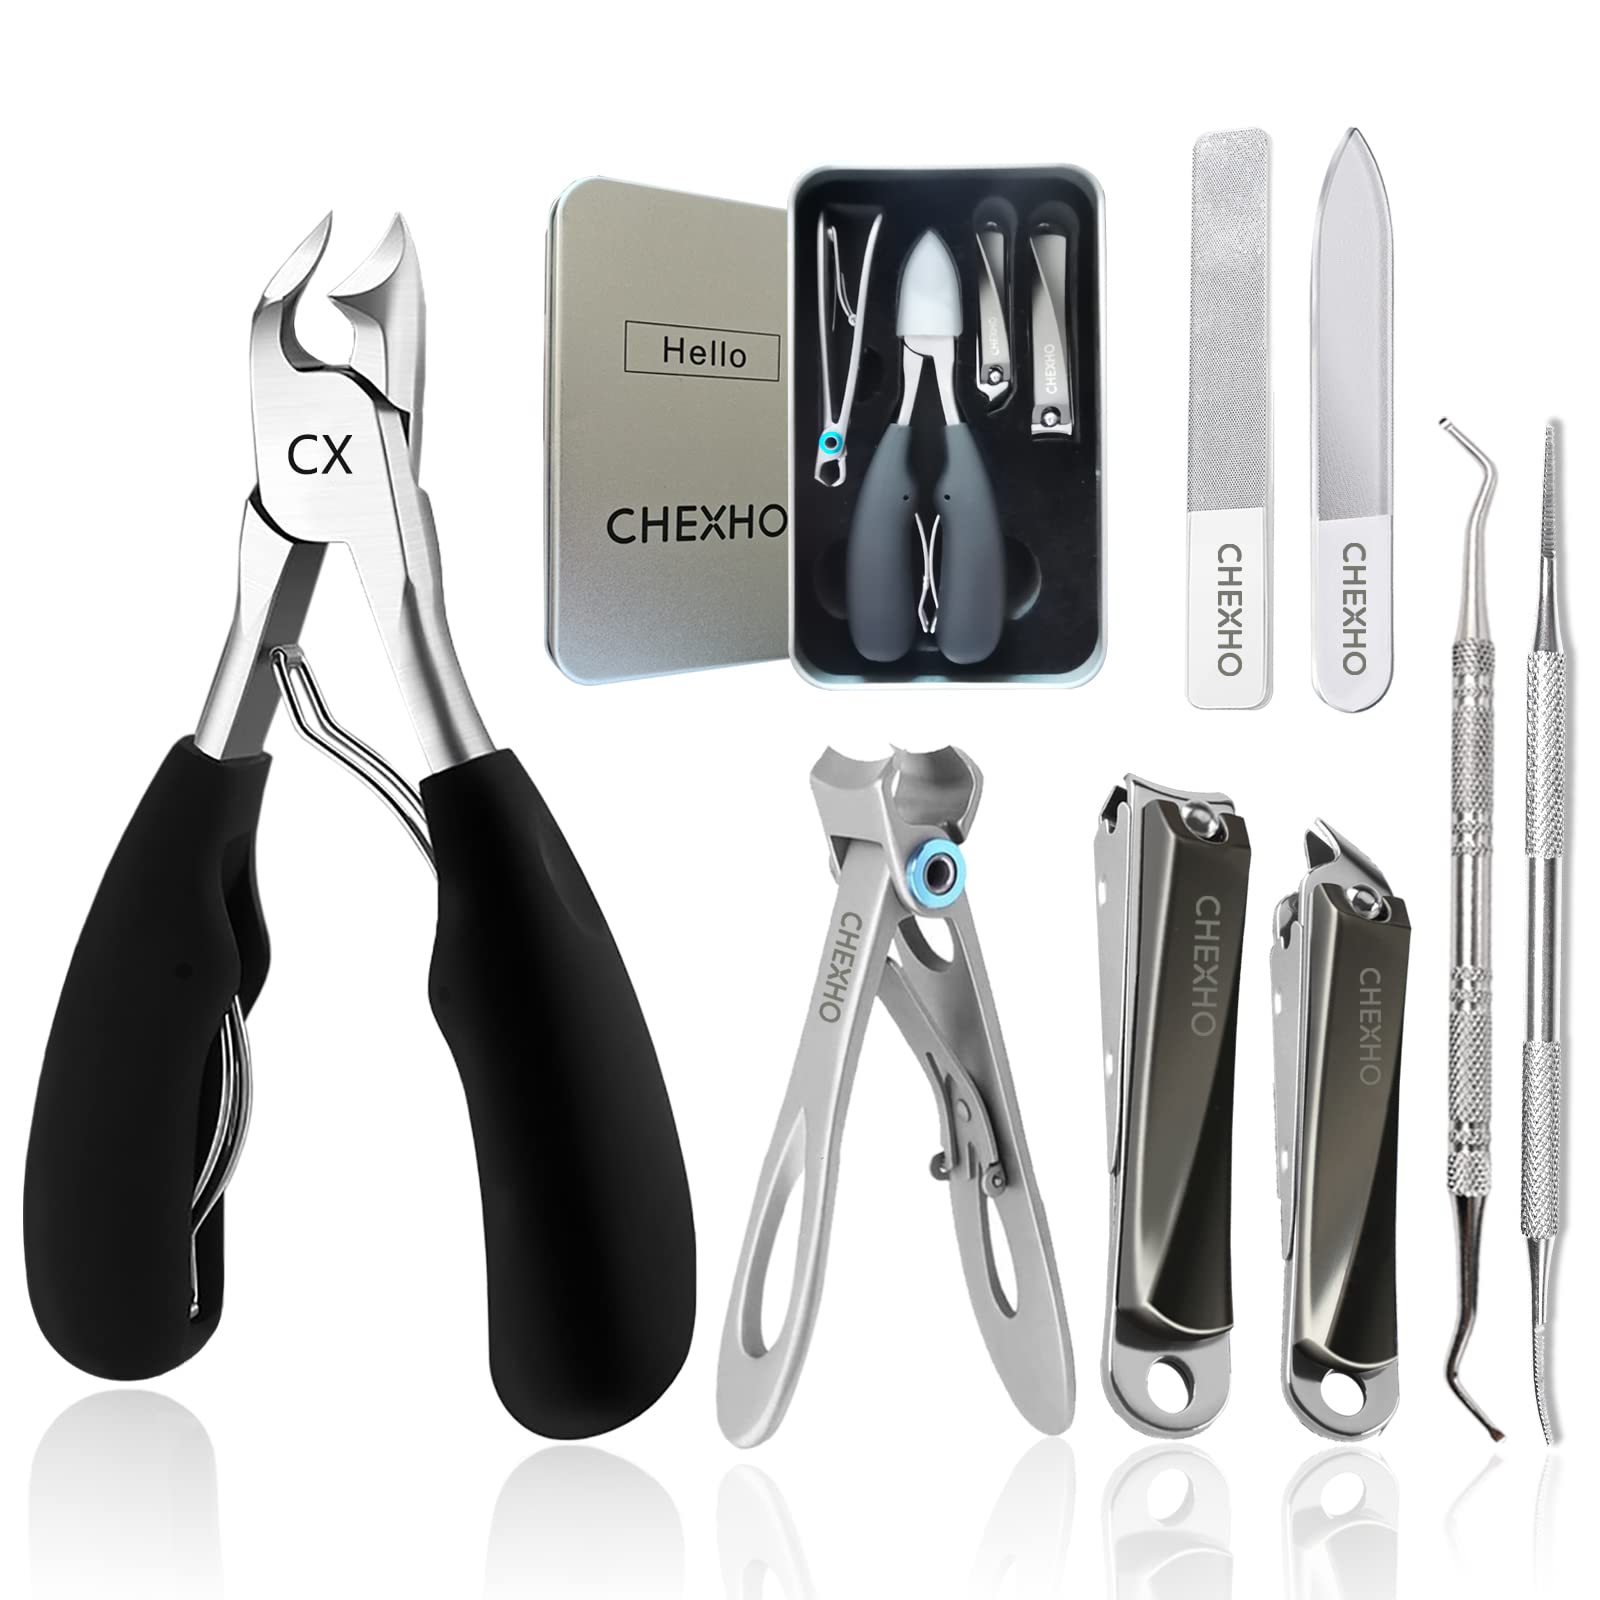 Nail Clippers for Thick Nails,Large Toenail Clippers for Ingrown Toenails  or Thick Nails for Men,Women, Seniors,Adults. Professional Stainless Steel